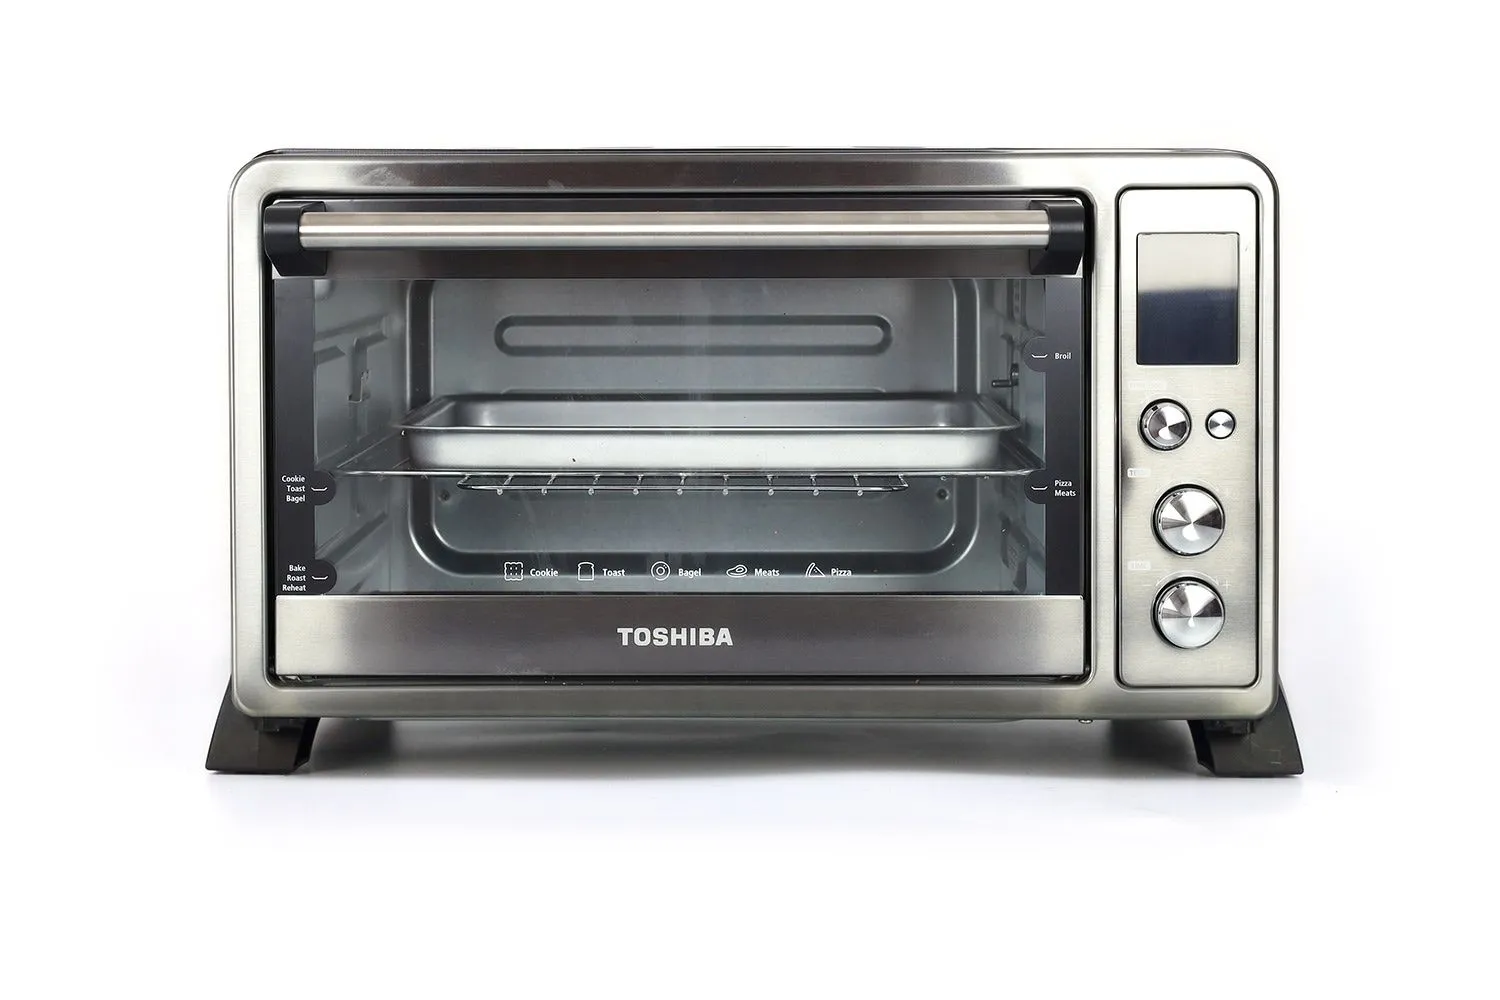 Toshiba AC25CEW-BS Digital Convection Toaster Oven In-depth Review